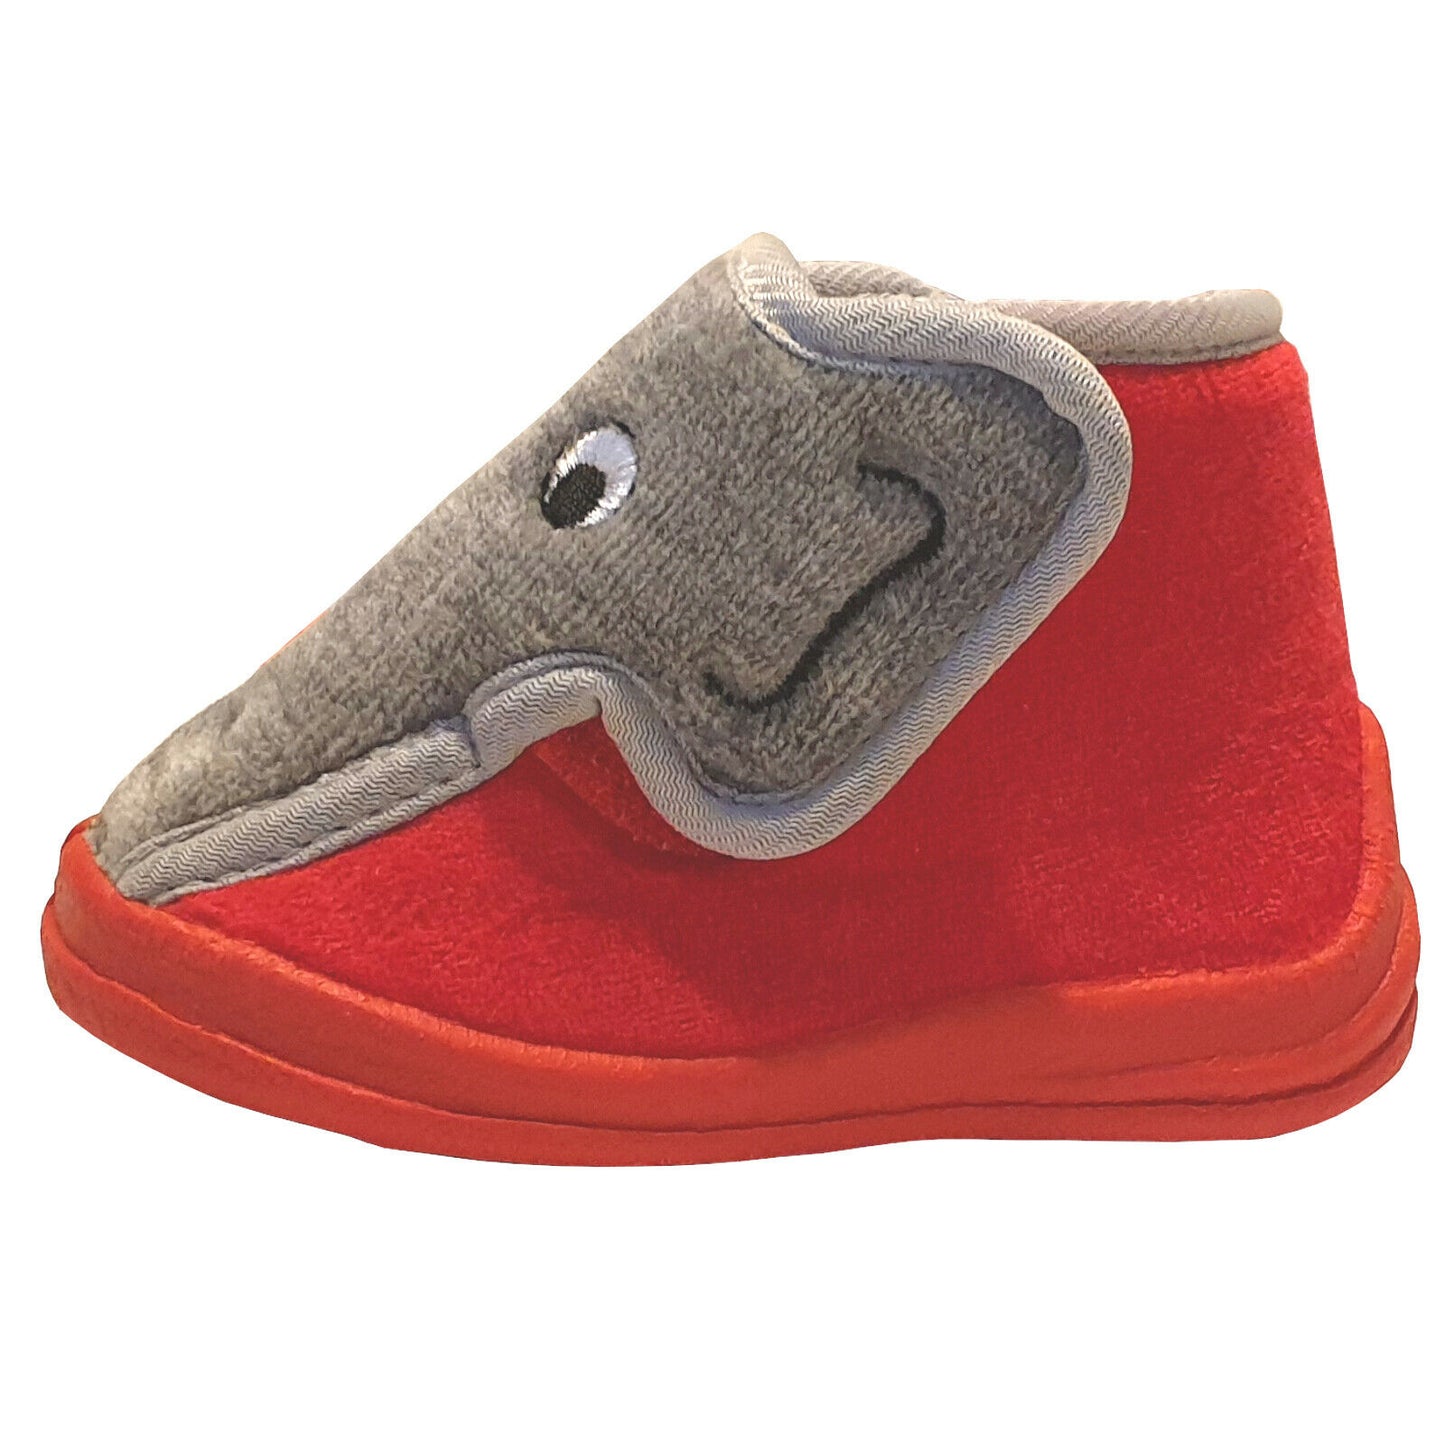 Little Kids Red and Grey Elephant Design Bootie style Slippers